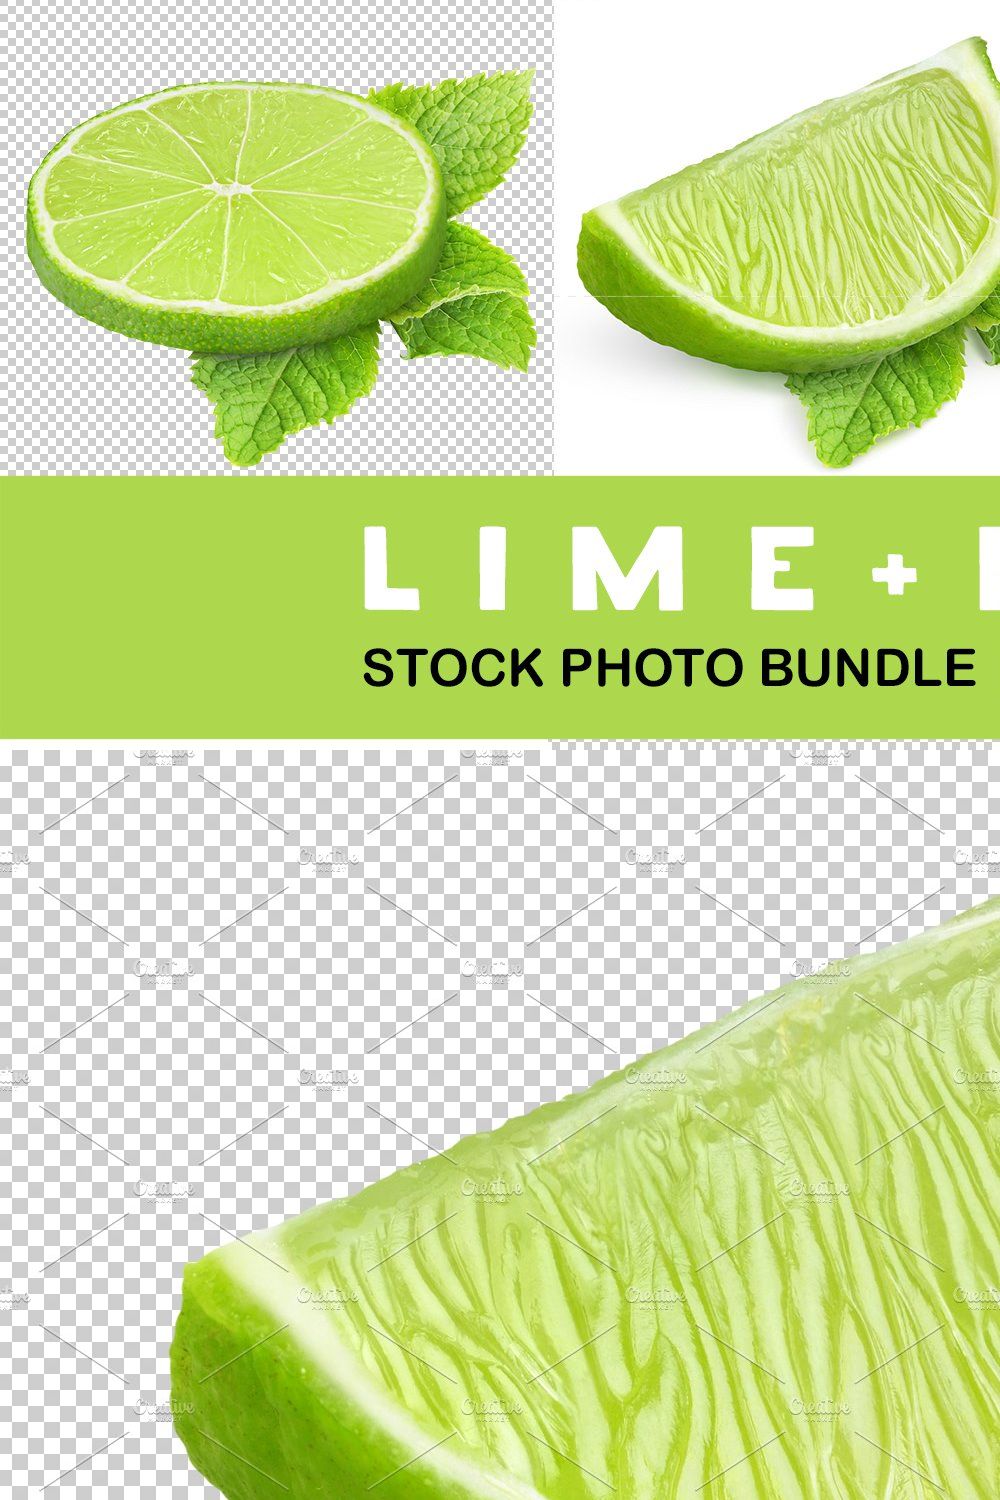 Lime and mint pinterest preview image.